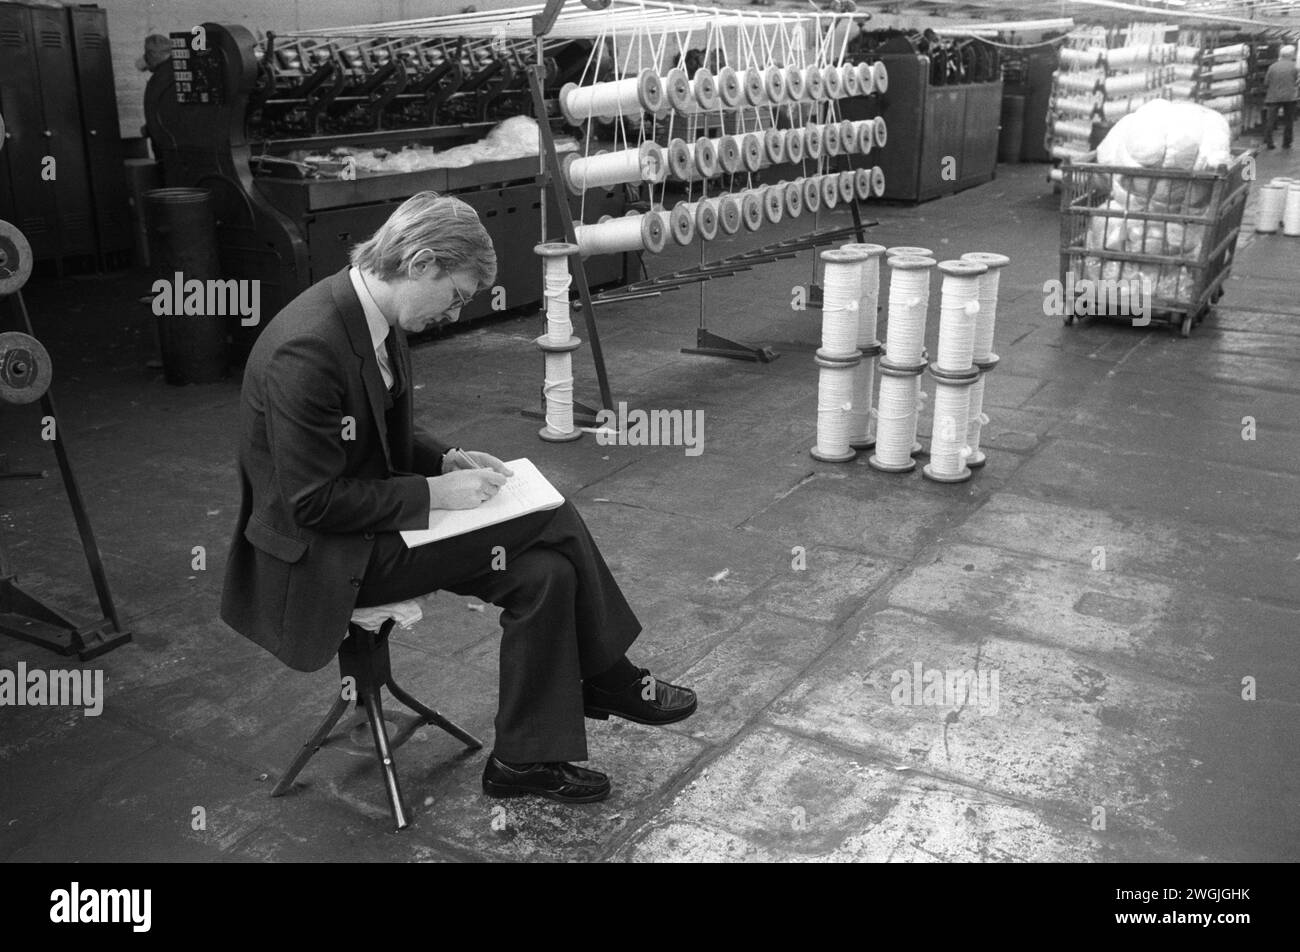 Salts Mill. Saltaire near Shipley, Bradford, West Yorkshire England 1981. The Managing Director of Salts Mill, A Victorian cotton textile mill. The factory building was so large that he used to spend quite a lot of the day working on the factory floor rather than in his office. 1980s UK HOMER SYKES Stock Photo